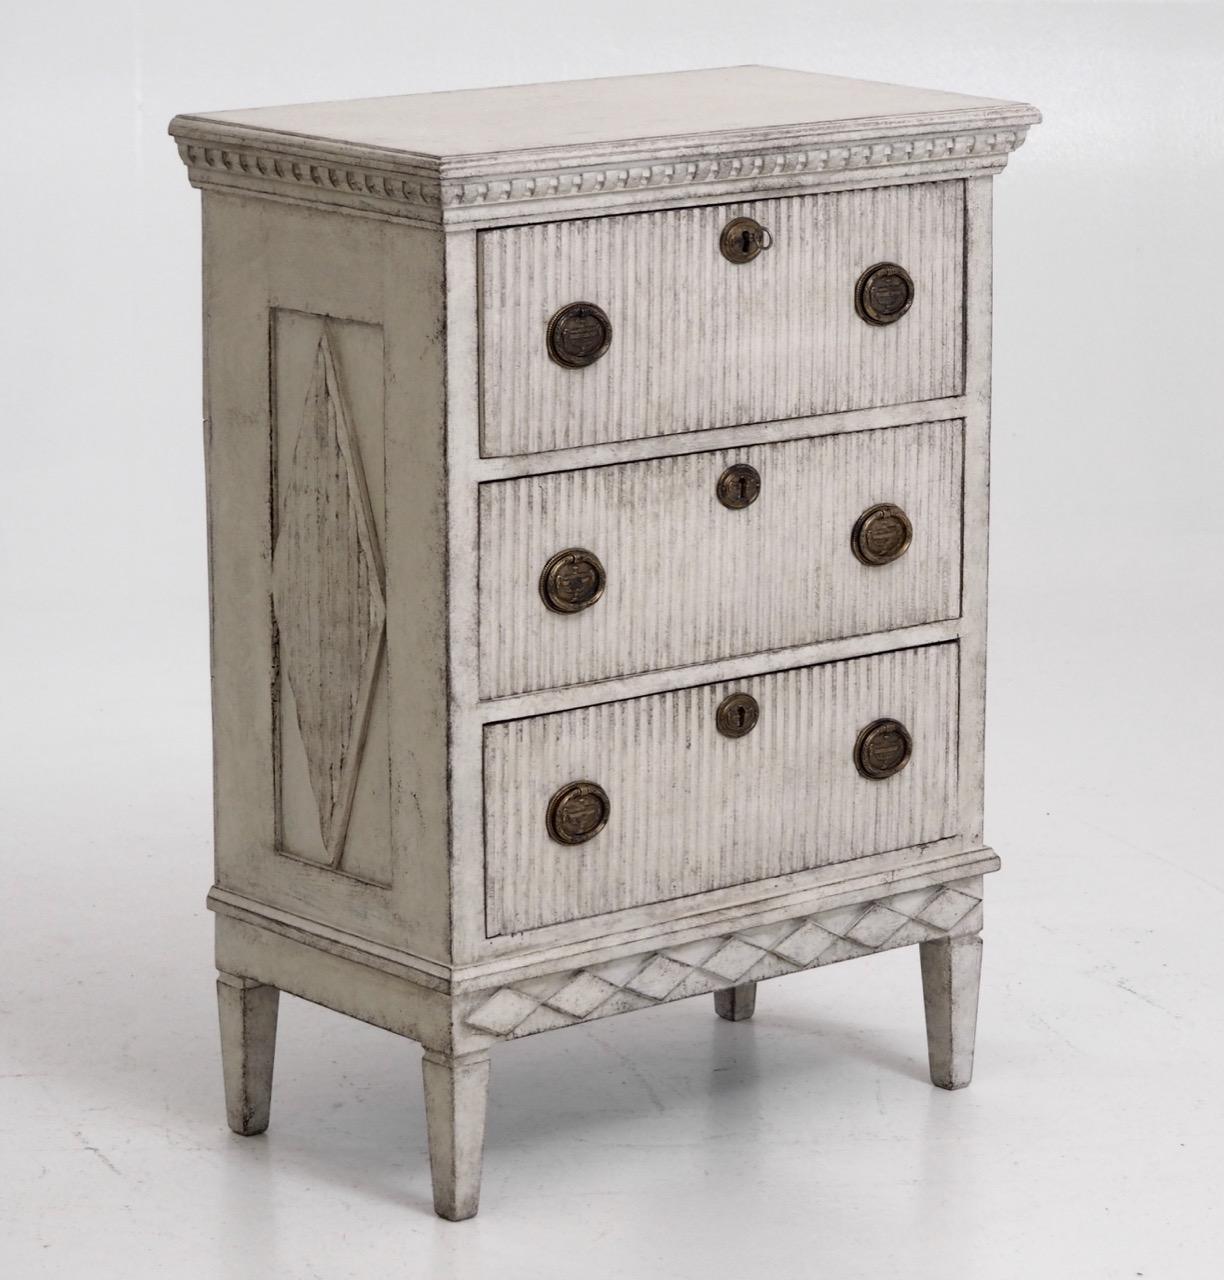 Gustavian Style chest, richly carved, 19th Century
Measures: H. 92, W. 68, D. 38 cm
H. 36.2, W. 26.7, D. 14.9 in.